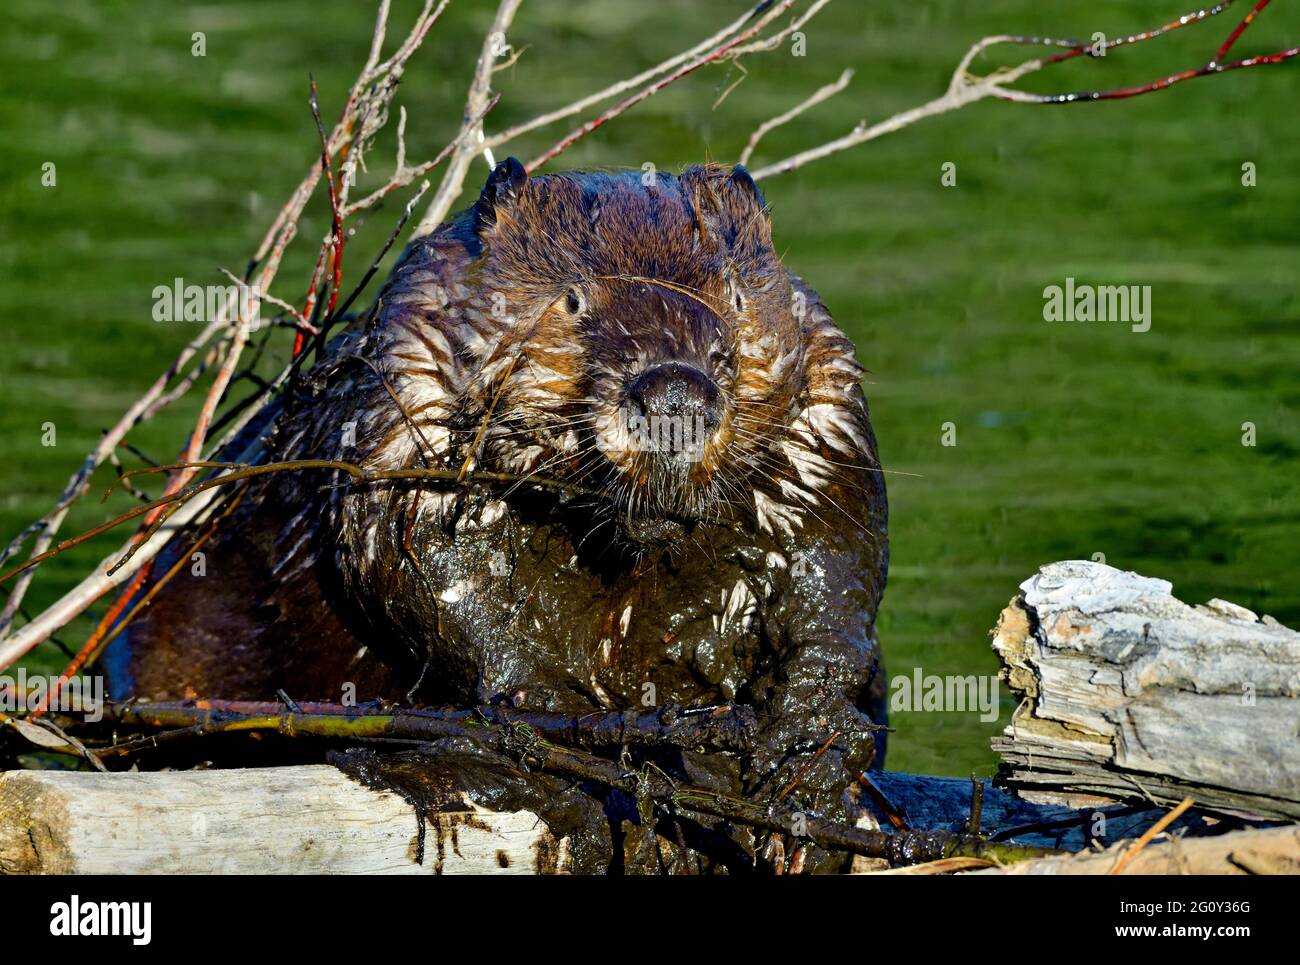 A wild beaver 'Castor canadensis', adding some wet mud to a leaking beaver pond in rural Alberta Canada. Stock Photo